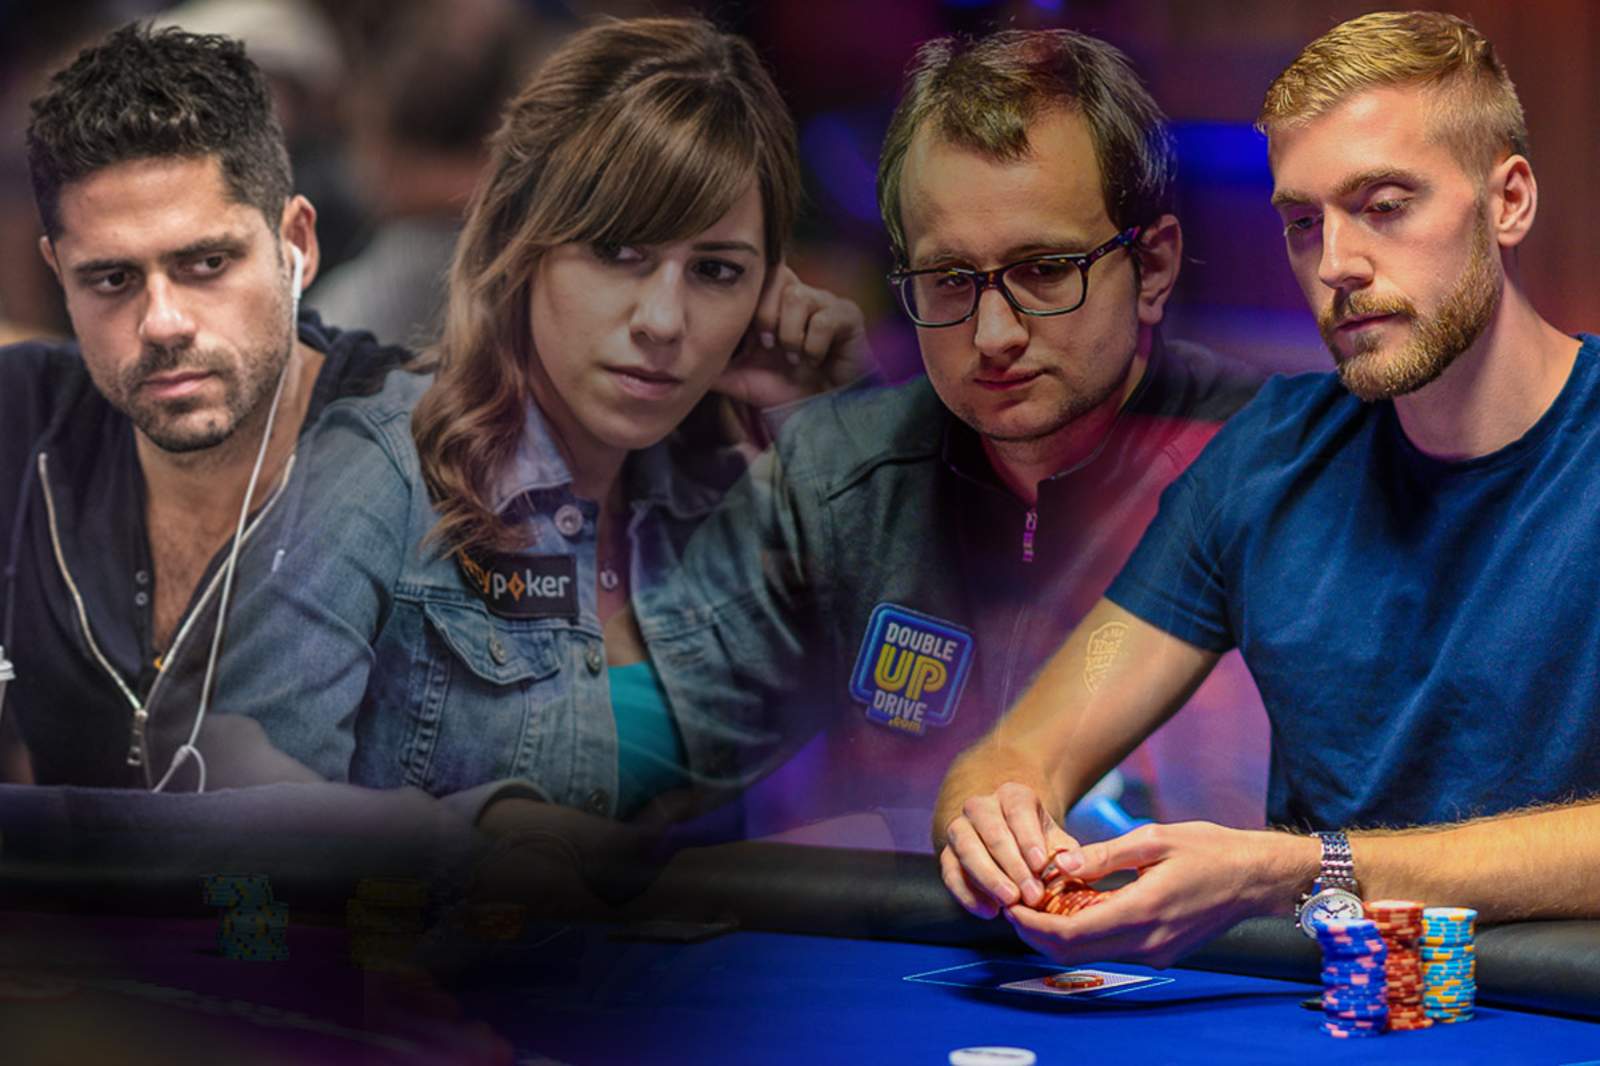 Watch Out For The Foreigners! Who to Watch at the 2019 World Series of Poker